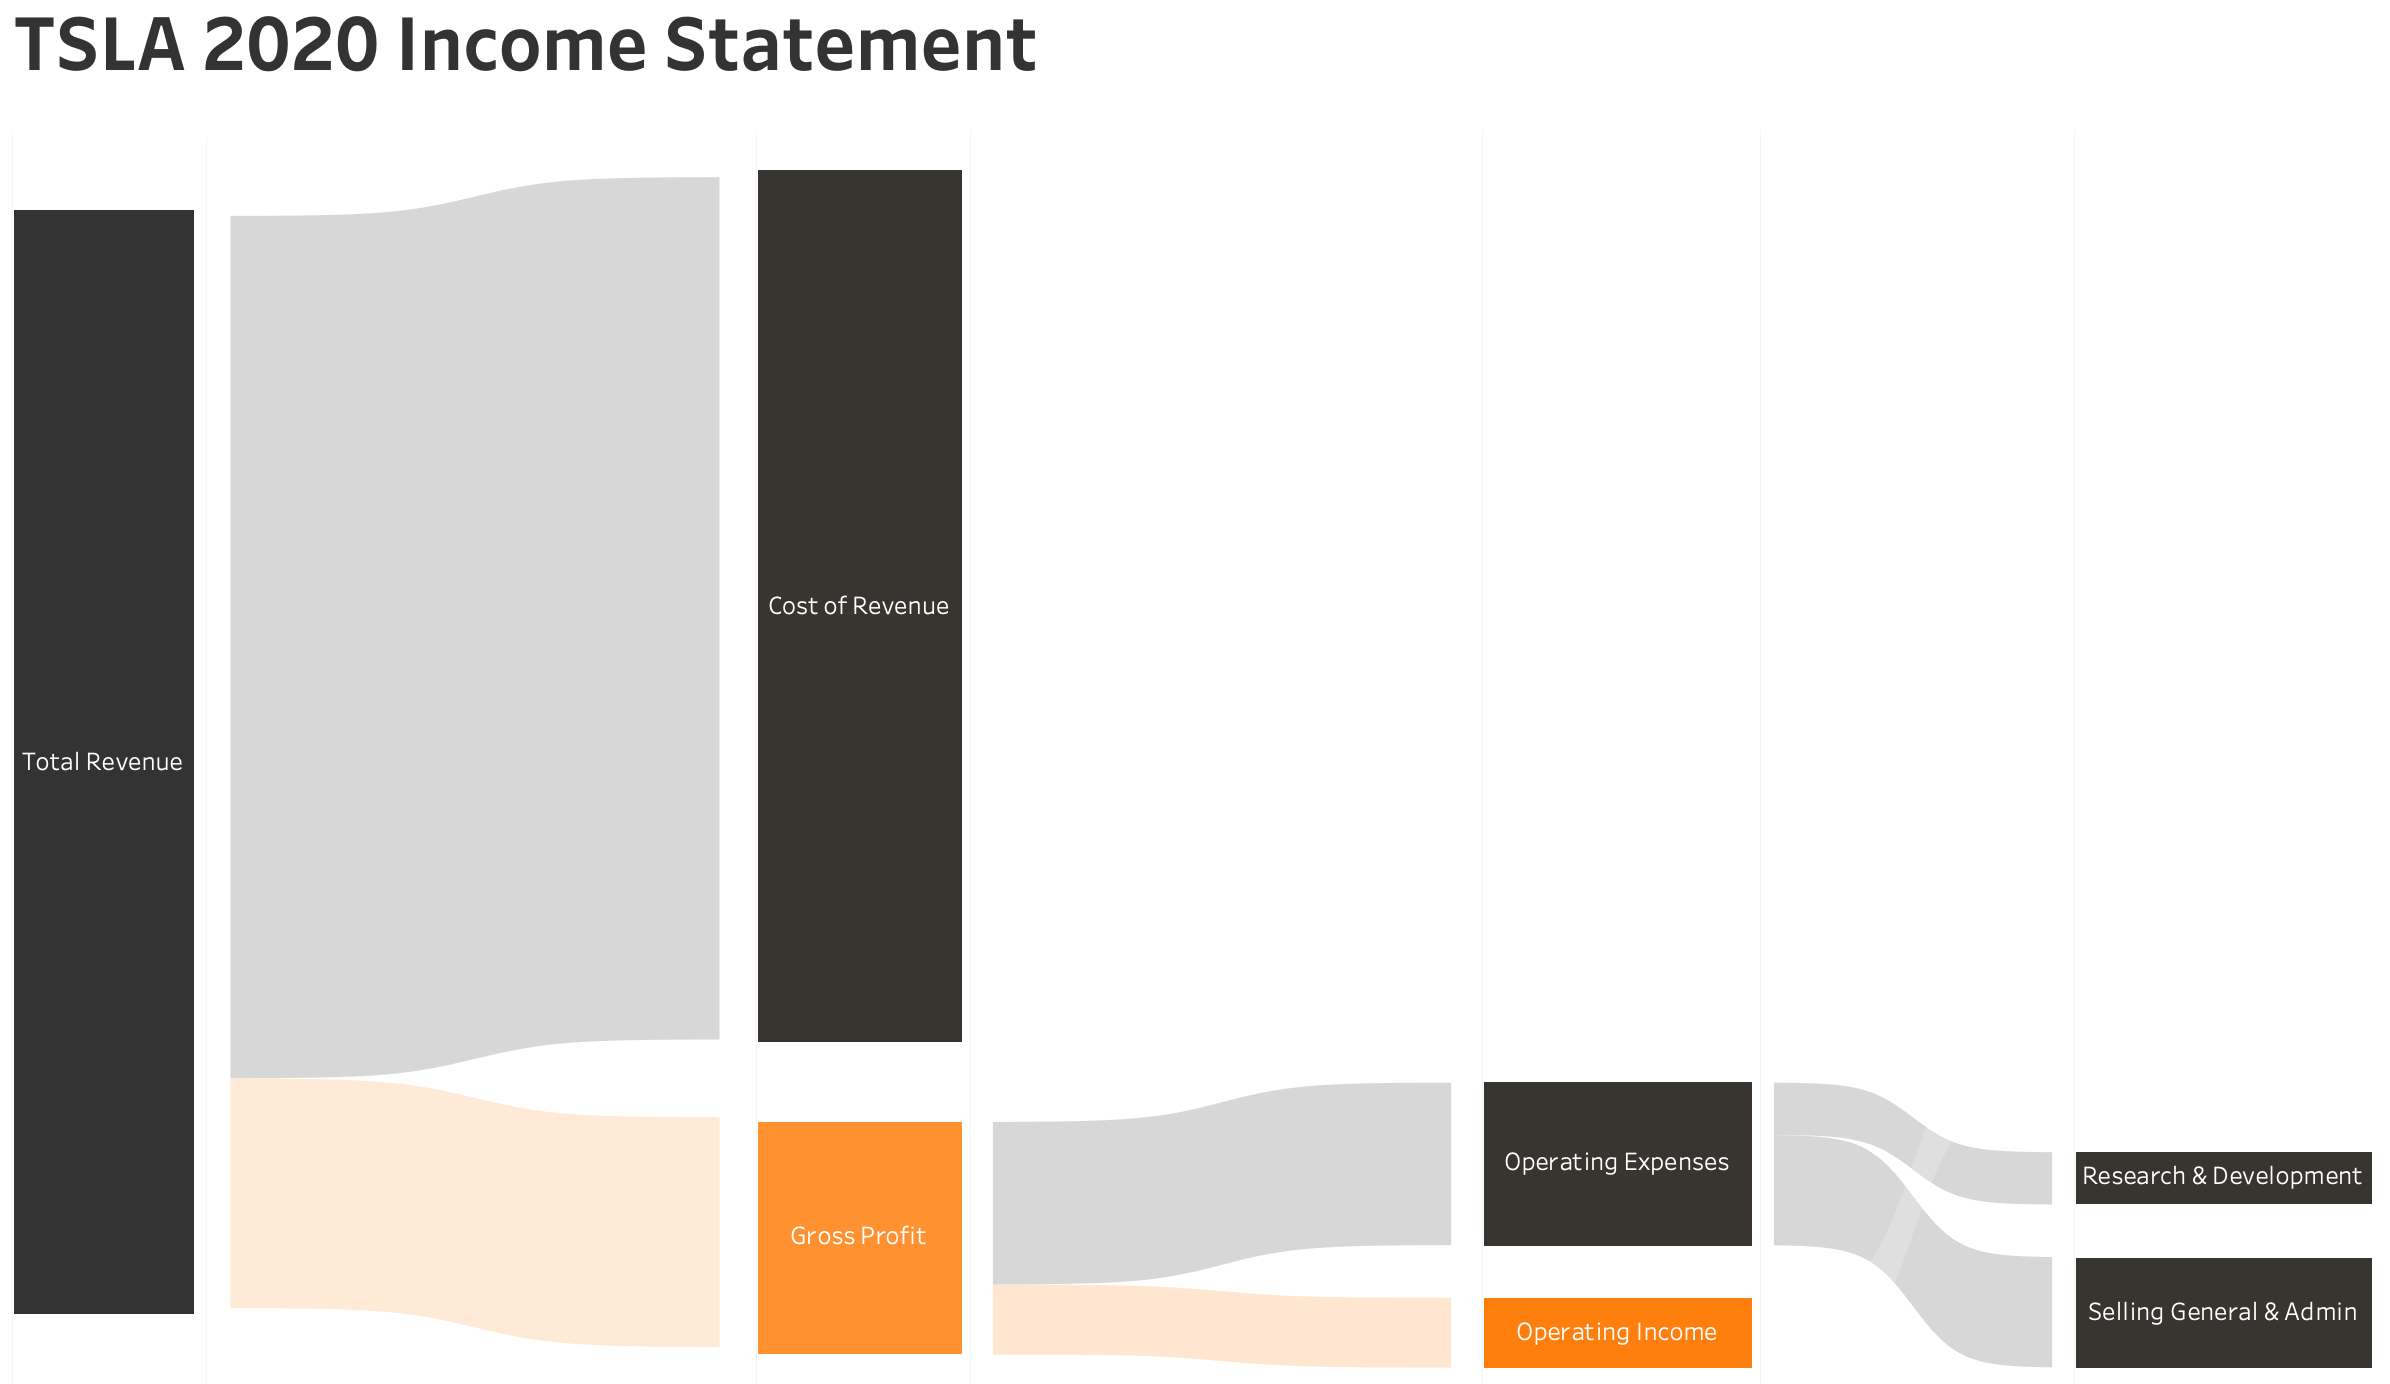   TSLA 2020 Income Statement SankeyBased on a template from the Flerlage Twins  https   www.flerlagetwins.com 2019 04 more sankey templates.html 